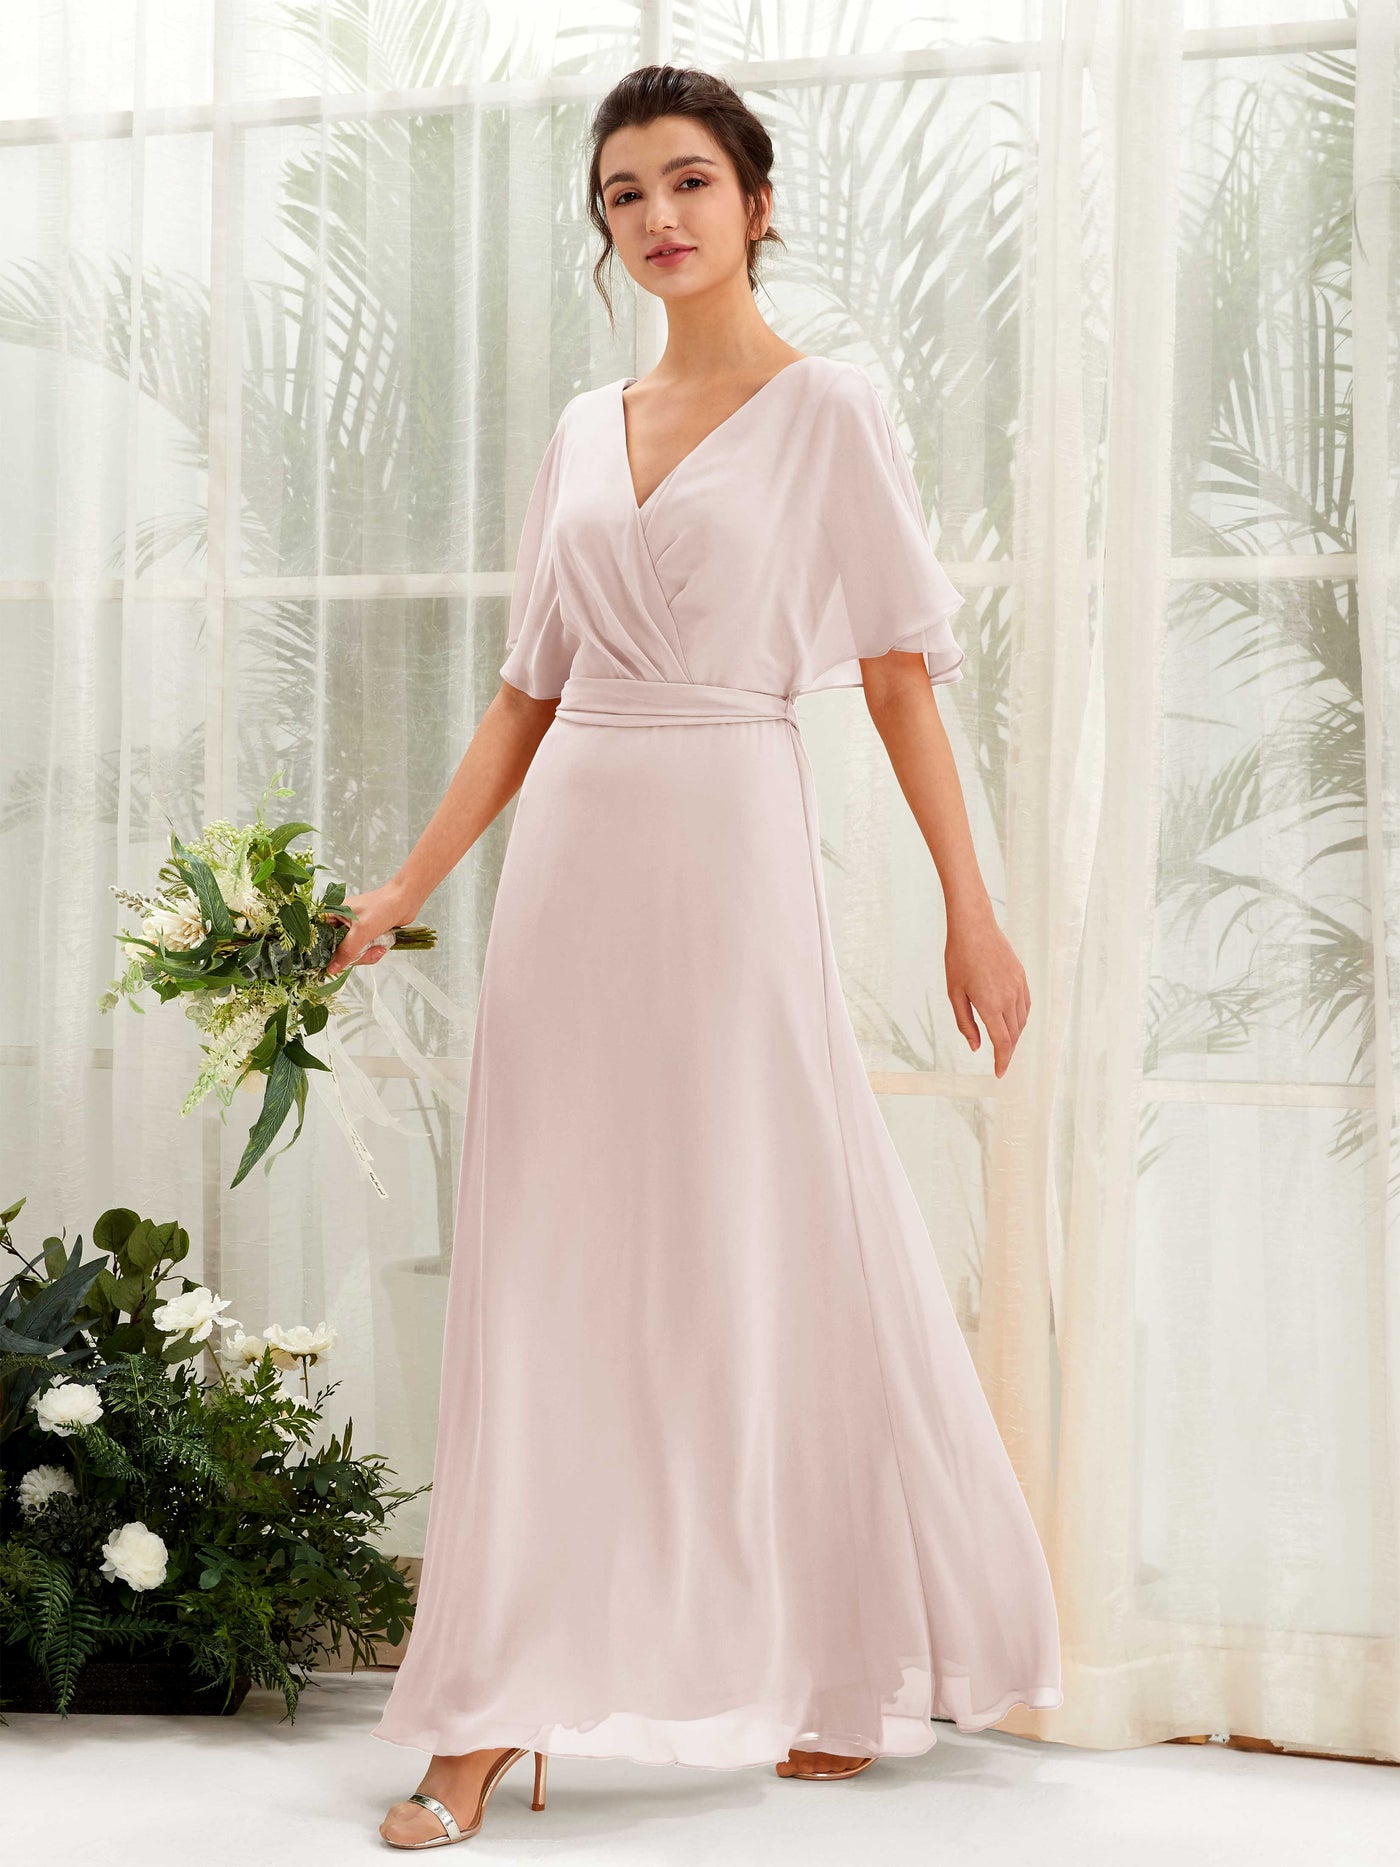 Biscotti Bridesmaid Dresses Bridesmaid Dress A-line Chiffon V-neck Full Length Short Sleeves Wedding Party Dress (81222435)#color_biscotti